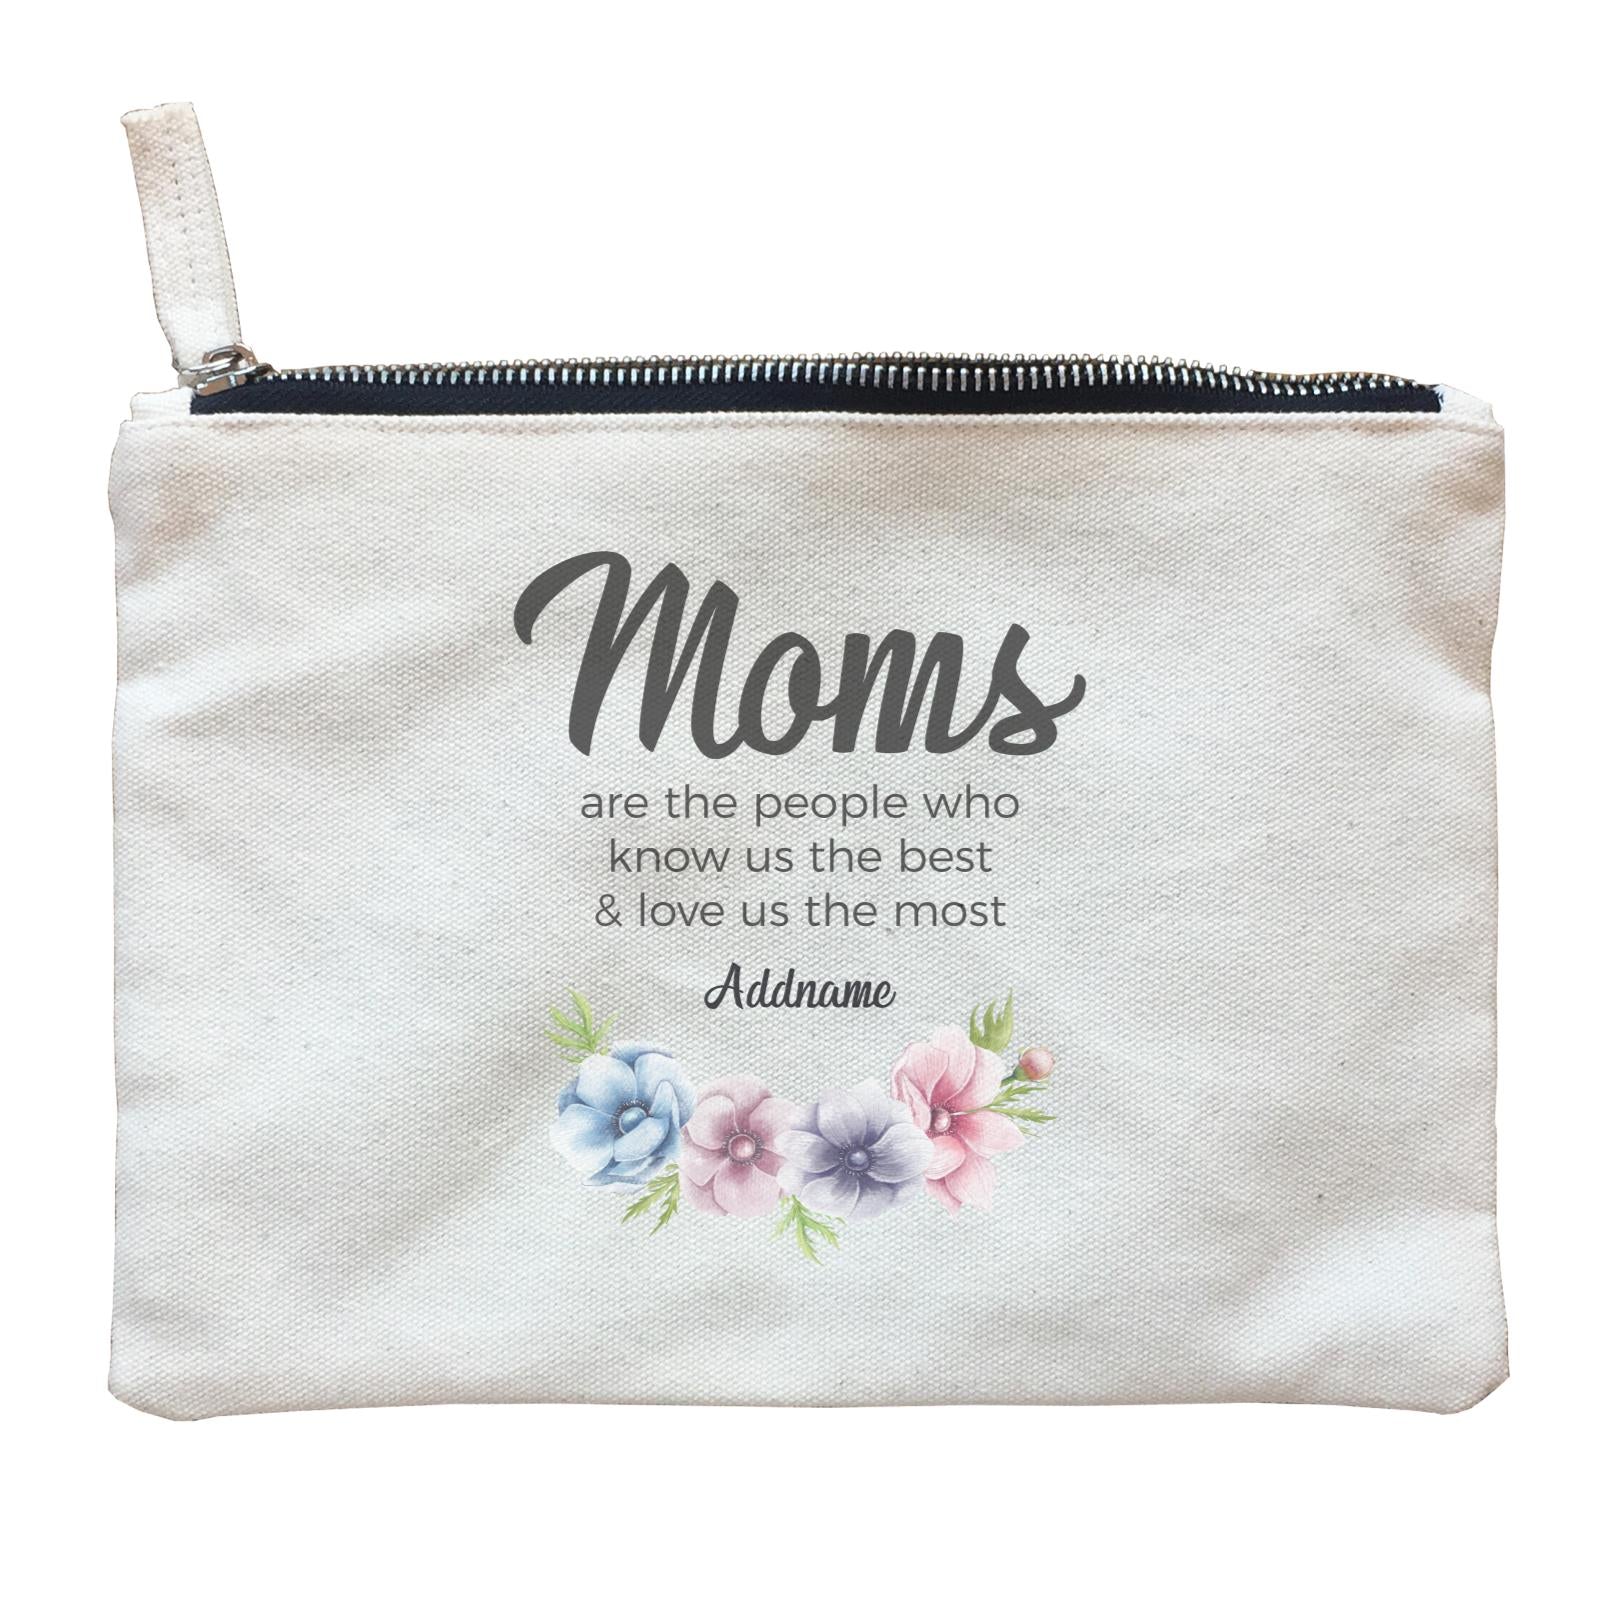 Sweet Mom Quotes 1 Moms Are The People Who Know Us The Best & Love Us The Most Addname Zipper Pouch